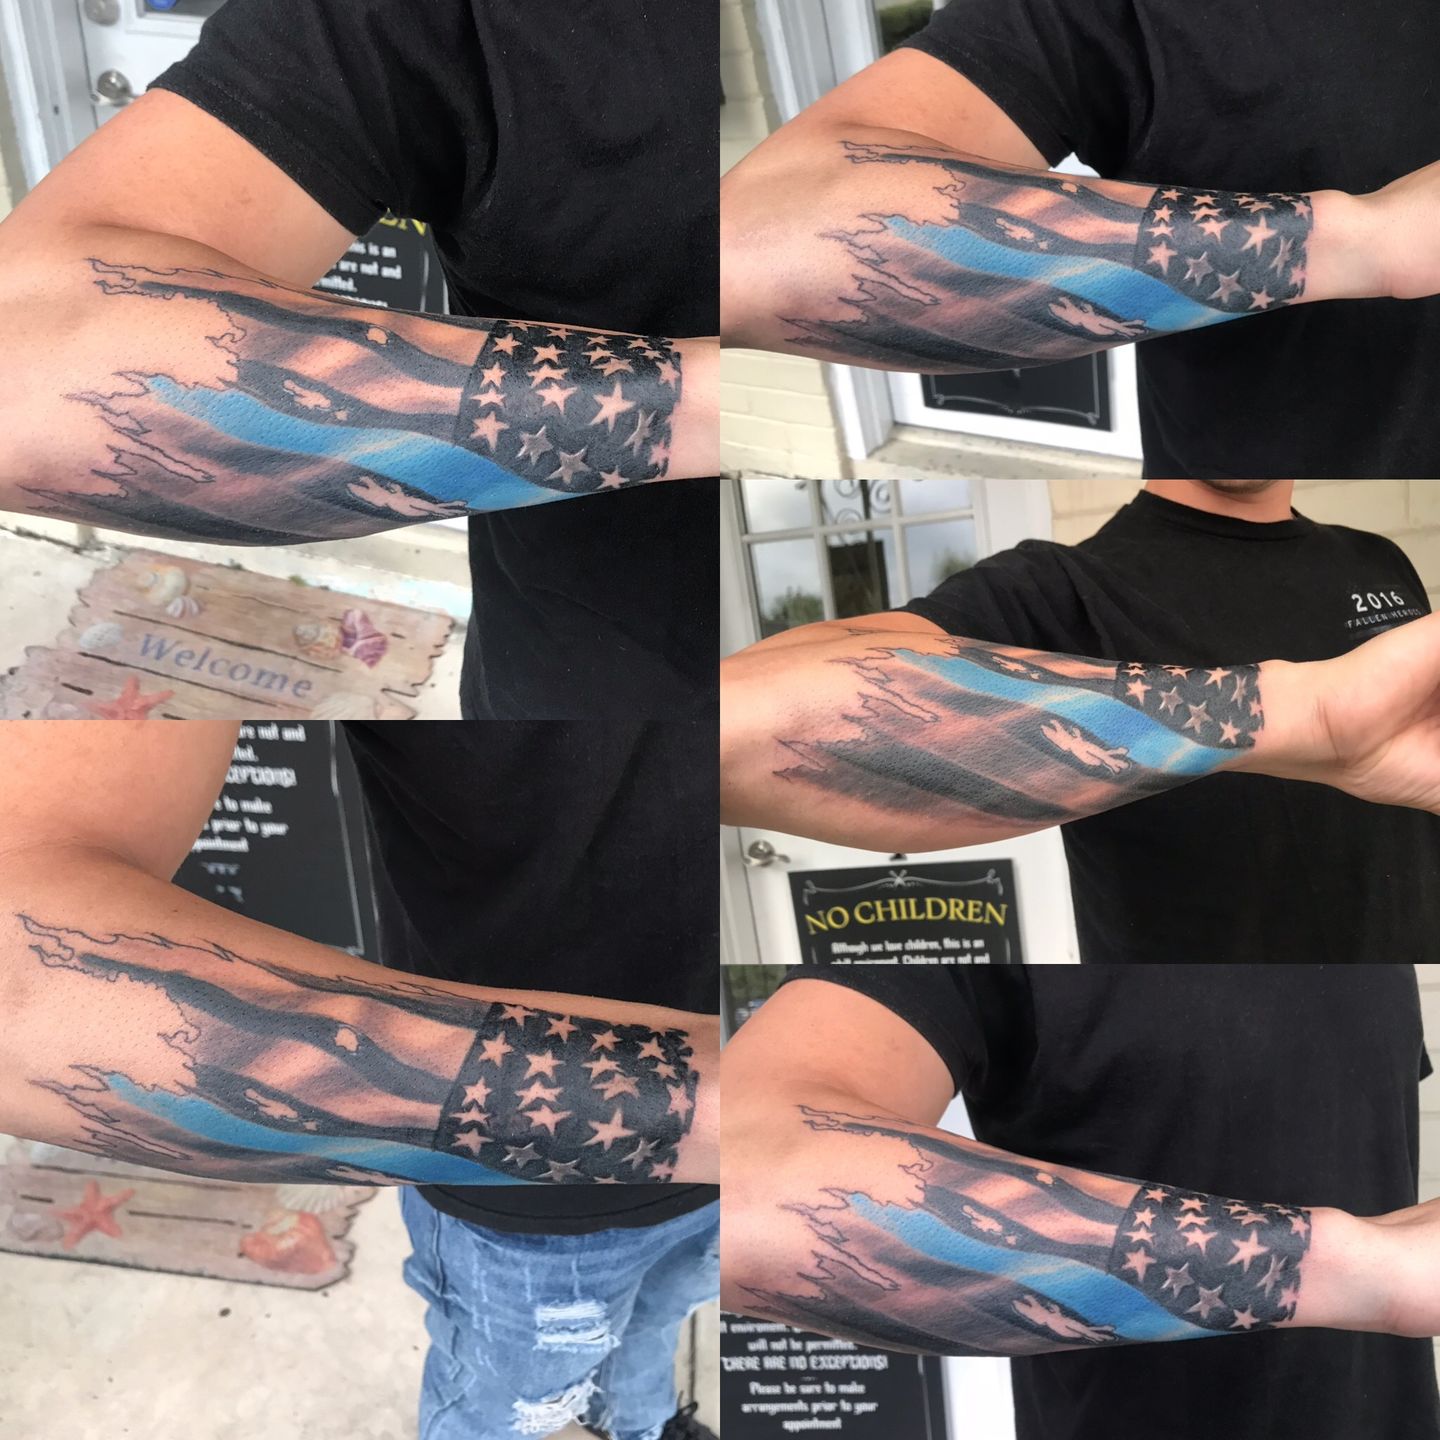 Generate a cutting-edge forearm tattoo design that blends nostalgia and  future. include minimalist geometric shapes like circles, triangles,  diamonds, and spirals with varying tones and line styles, as well as  metallic elements